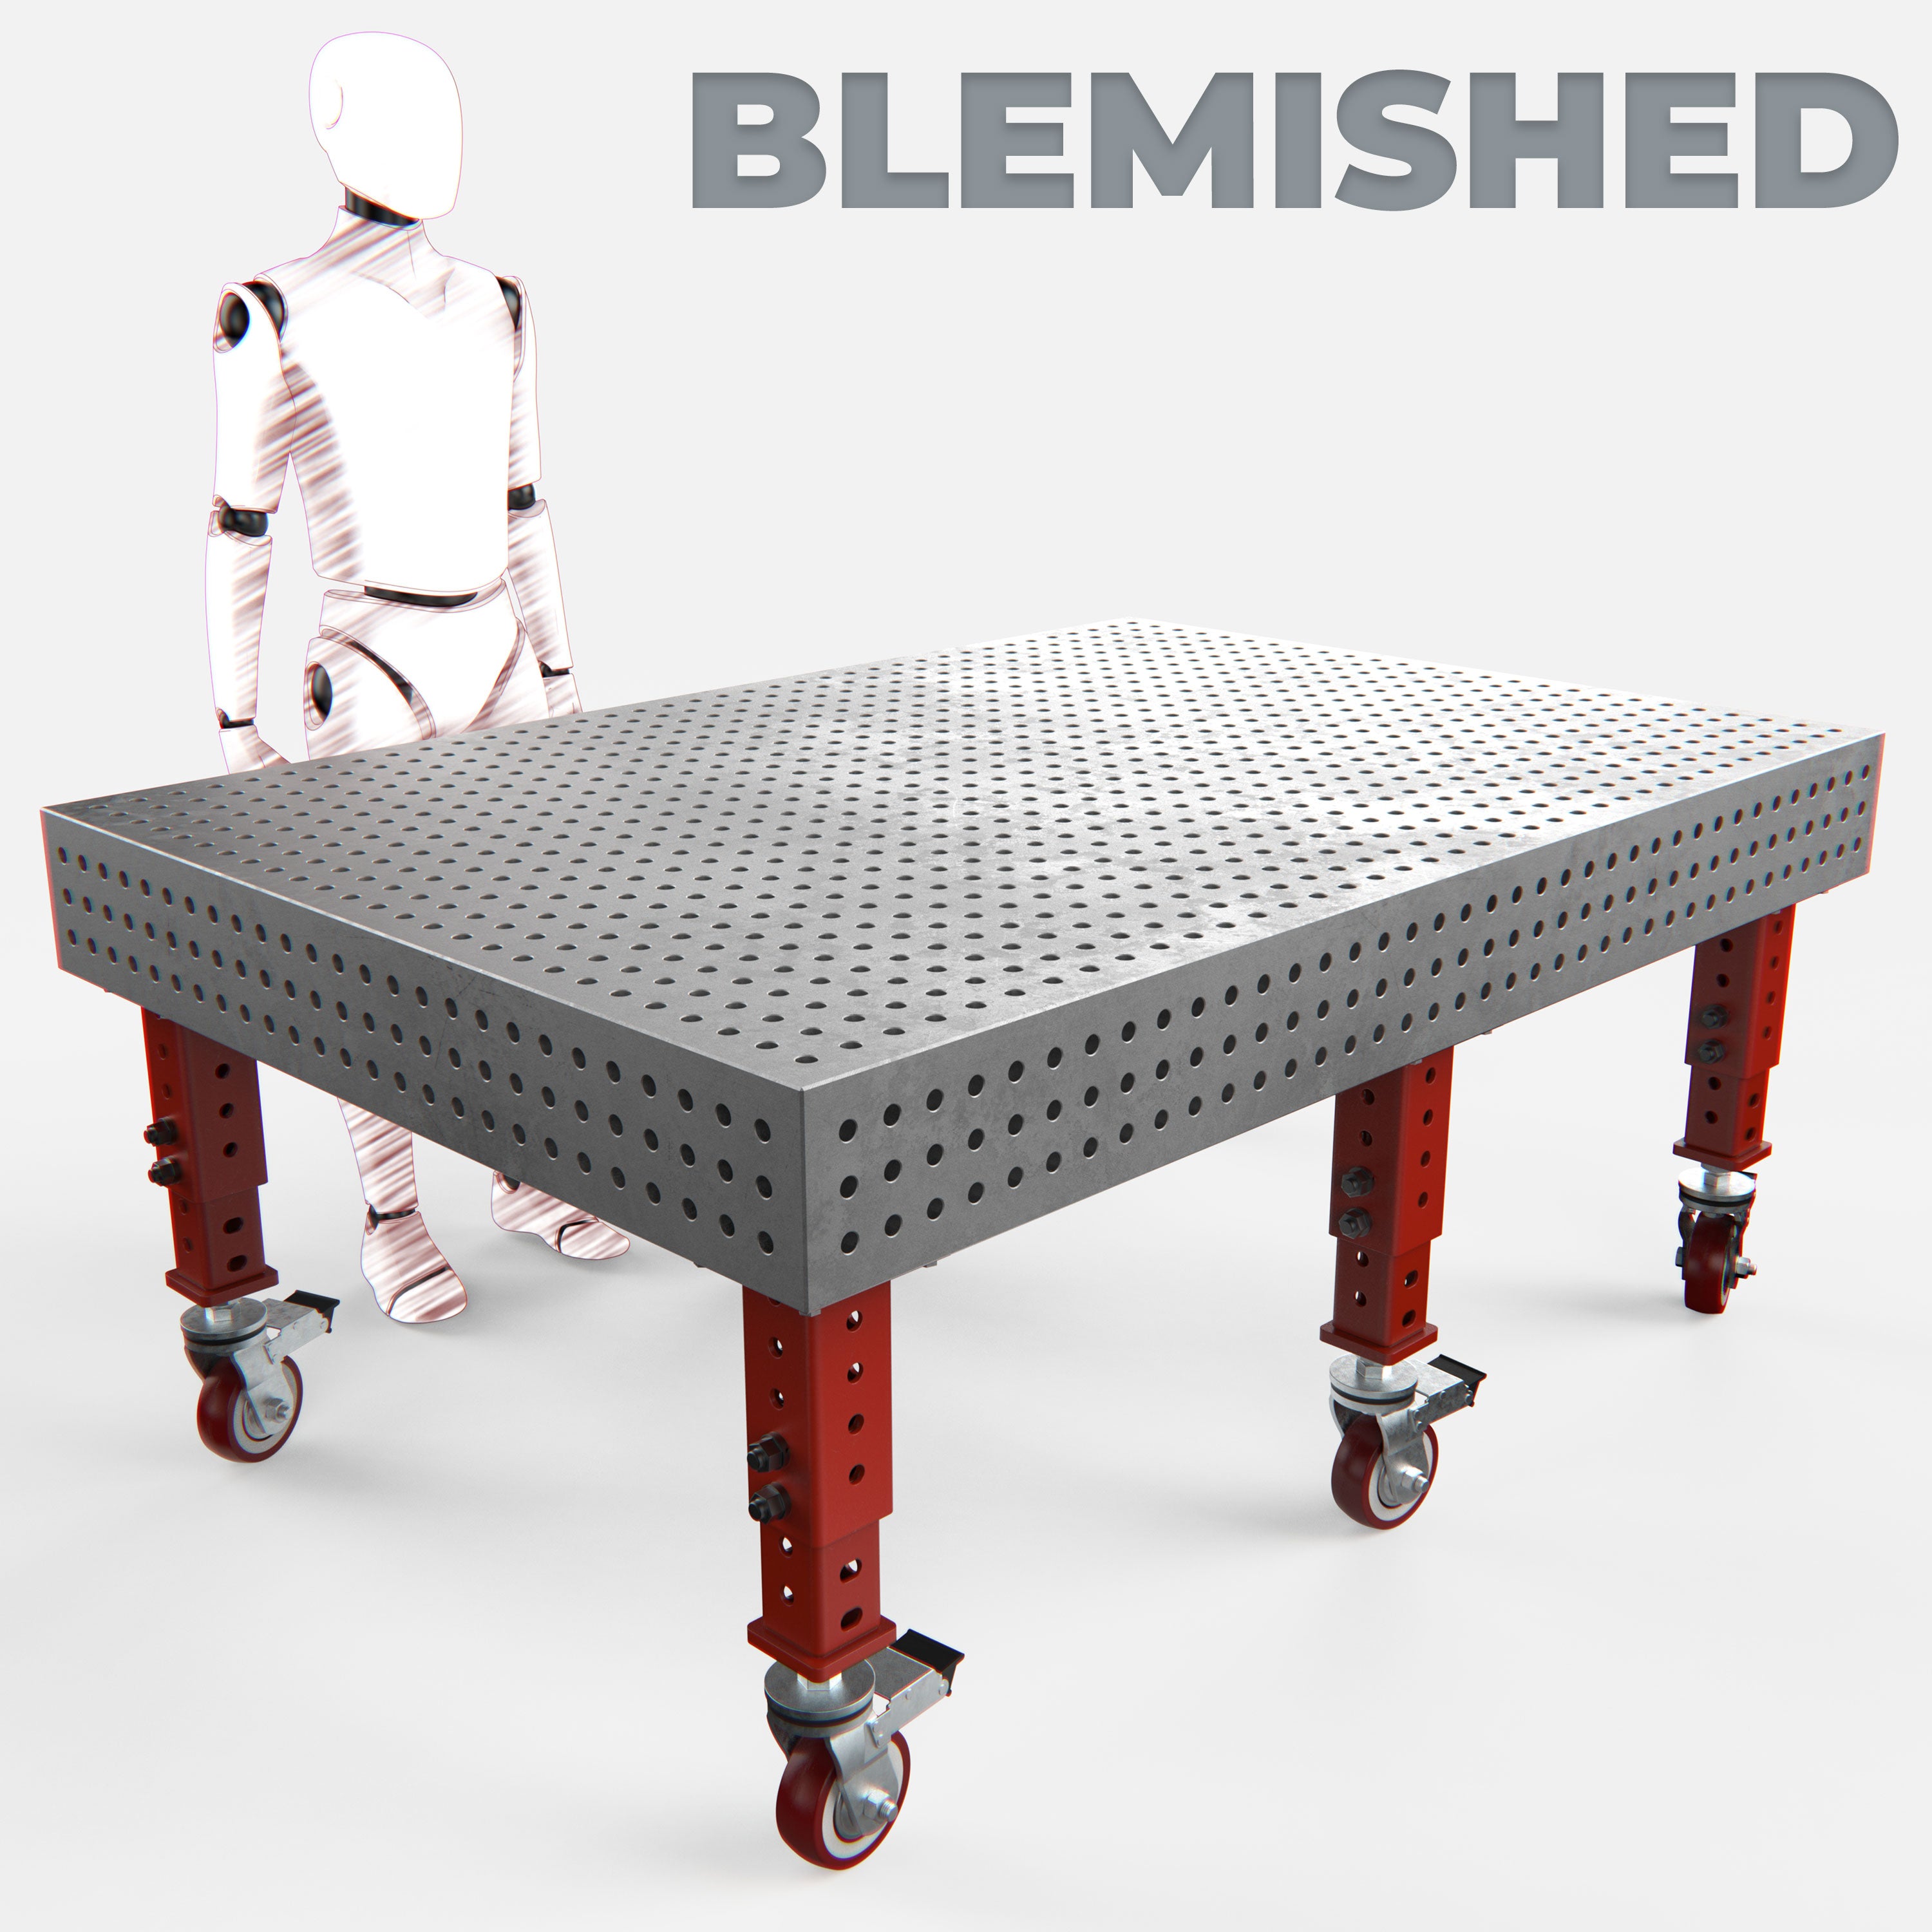 Blemished Heavy Duty Welding Table, 6.5' x 4.5' (78" x 54")